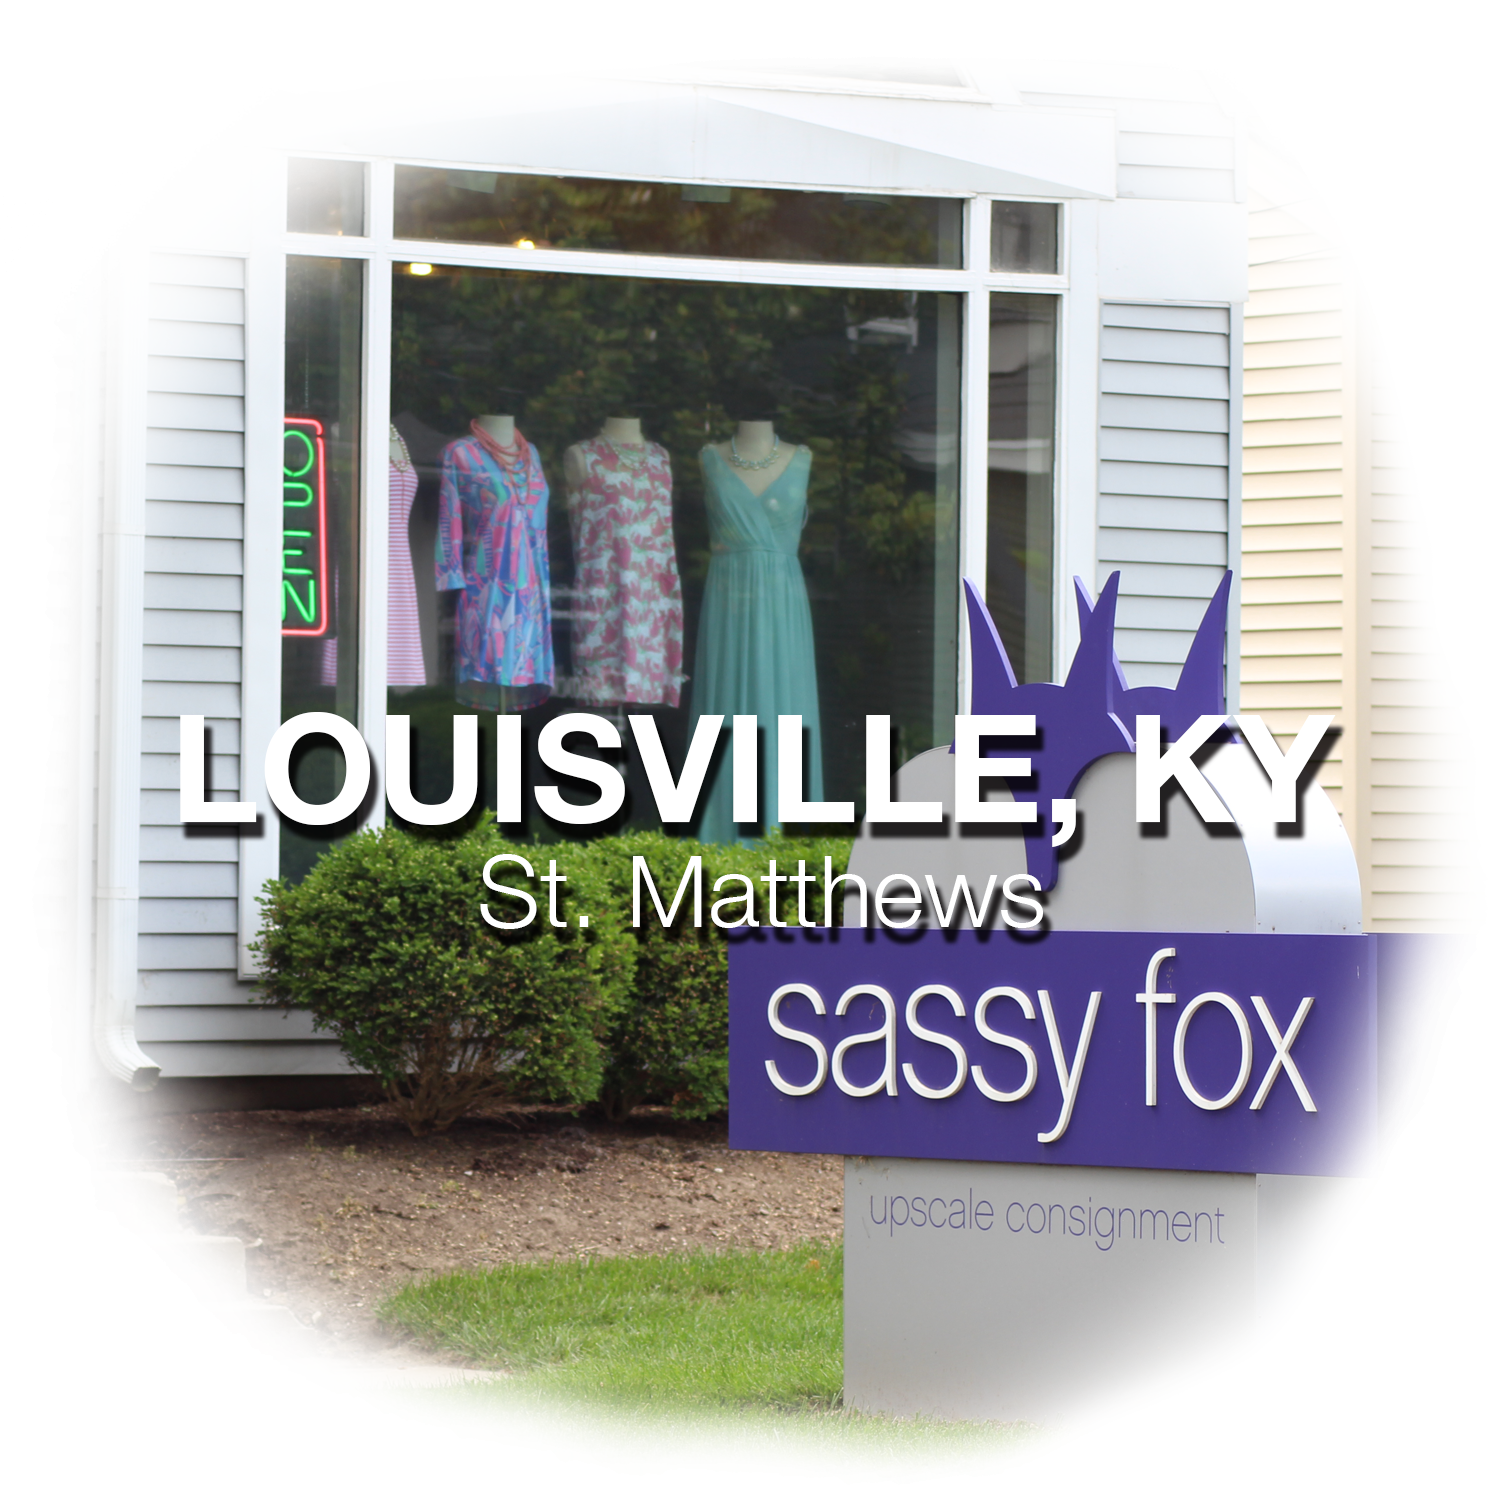 Business Profile: Sassy Foxx consignment shop features high-end